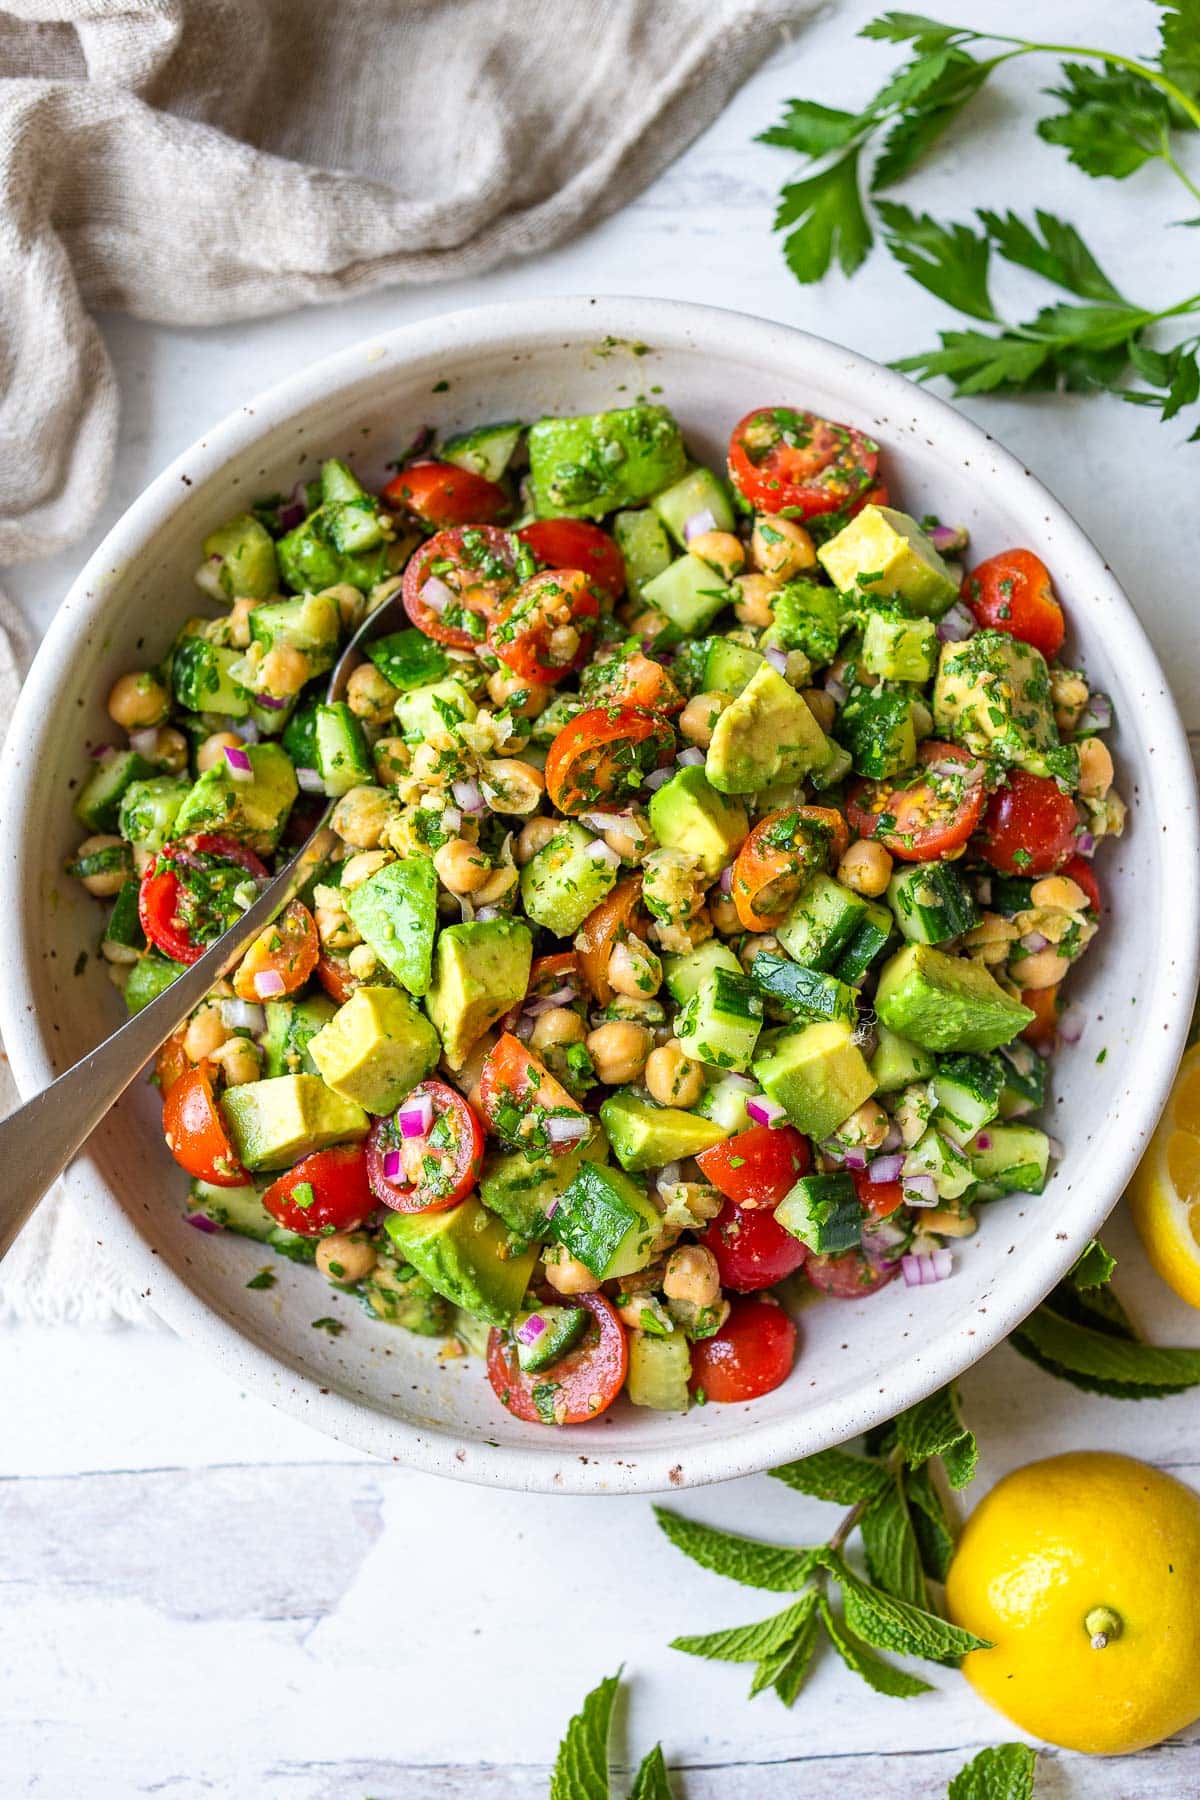 This Chickpea Salad is quick, easy and full of fresh flavors and crunchy texture. Made in one bowl with a simple lemon olive oil dressing, everything comes together in about 20 minutes! 